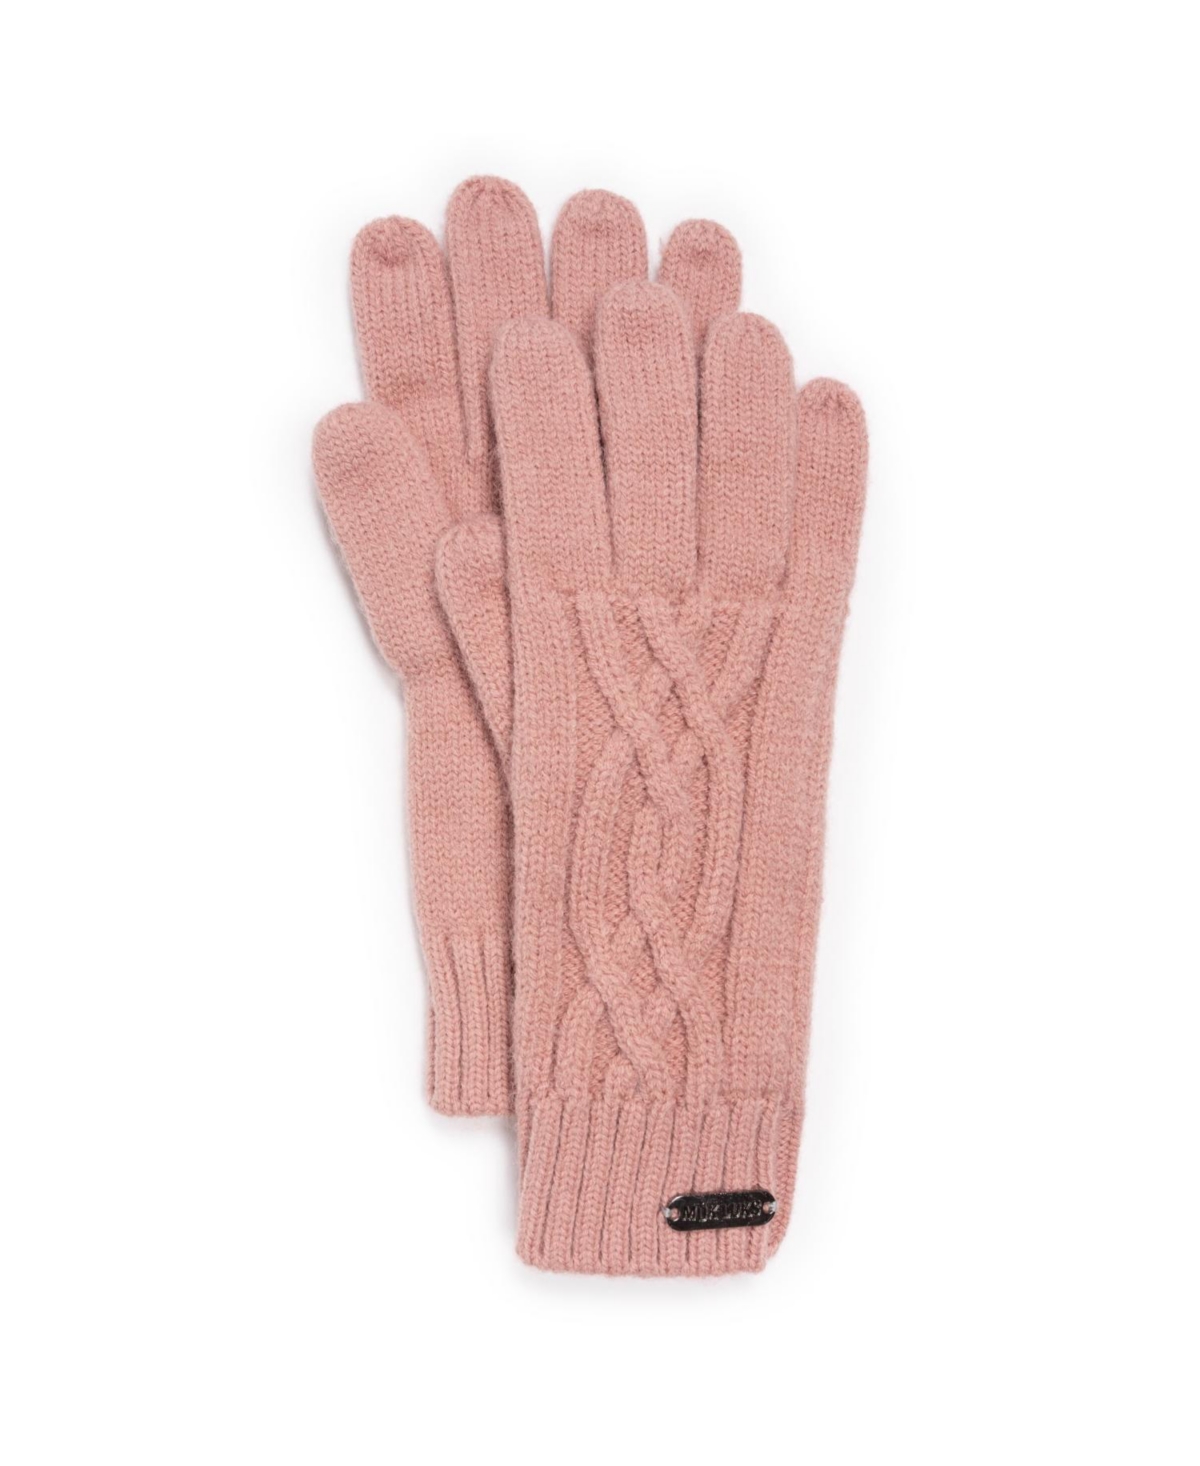 Women's Cozy Knit Gloves, Candied Peach, One Size - Candied peach